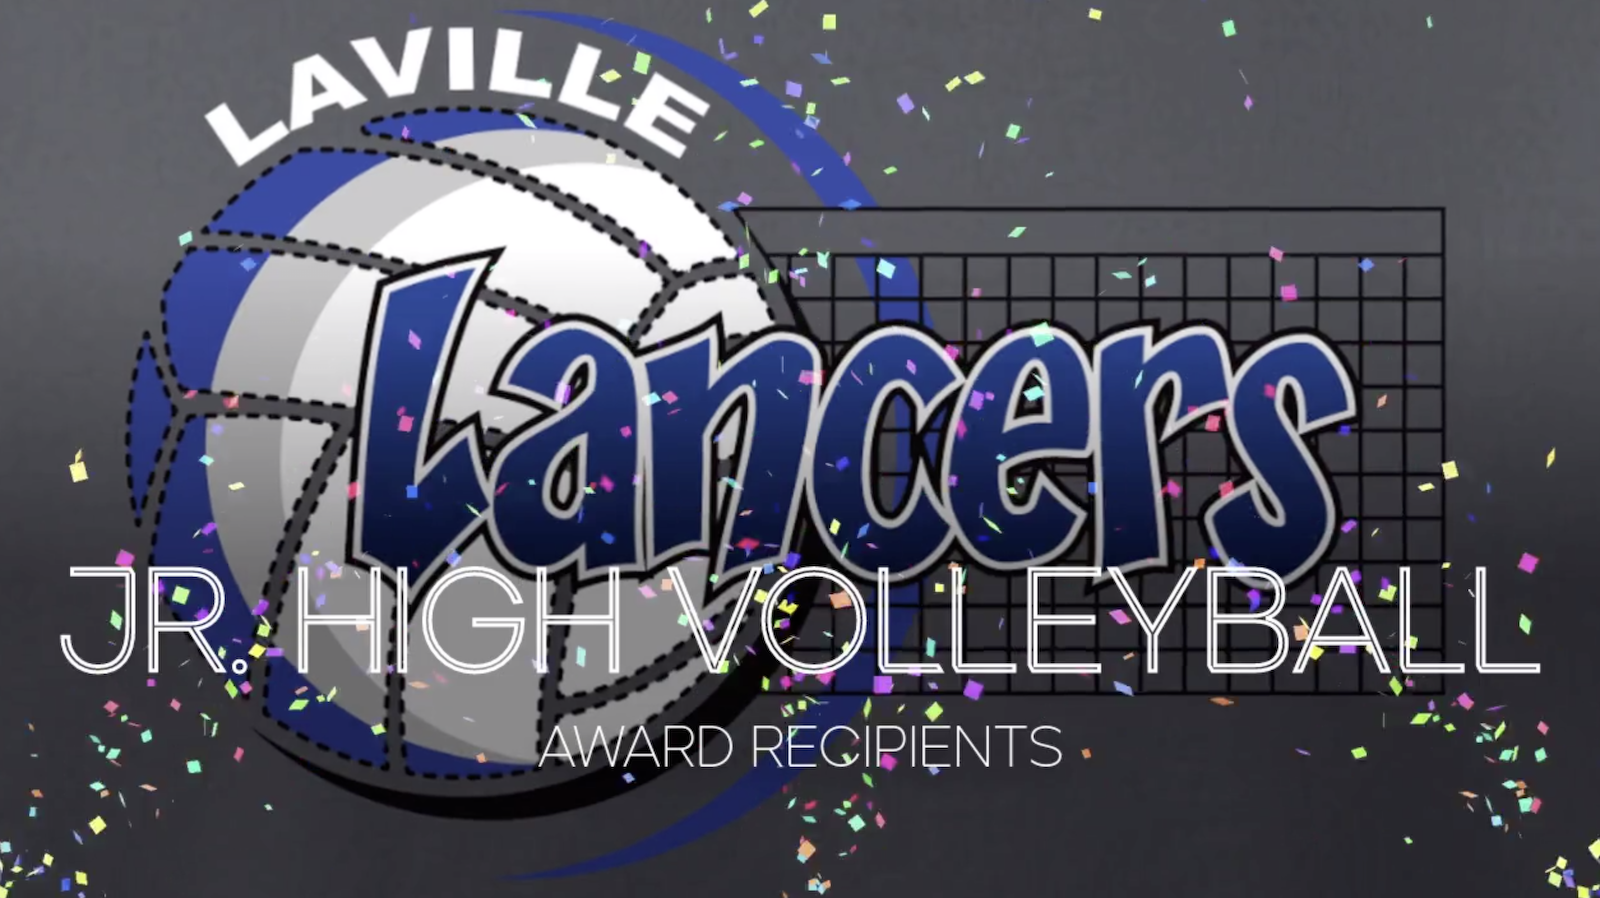 Jr. High Volleyball Awards Recognition cover photo